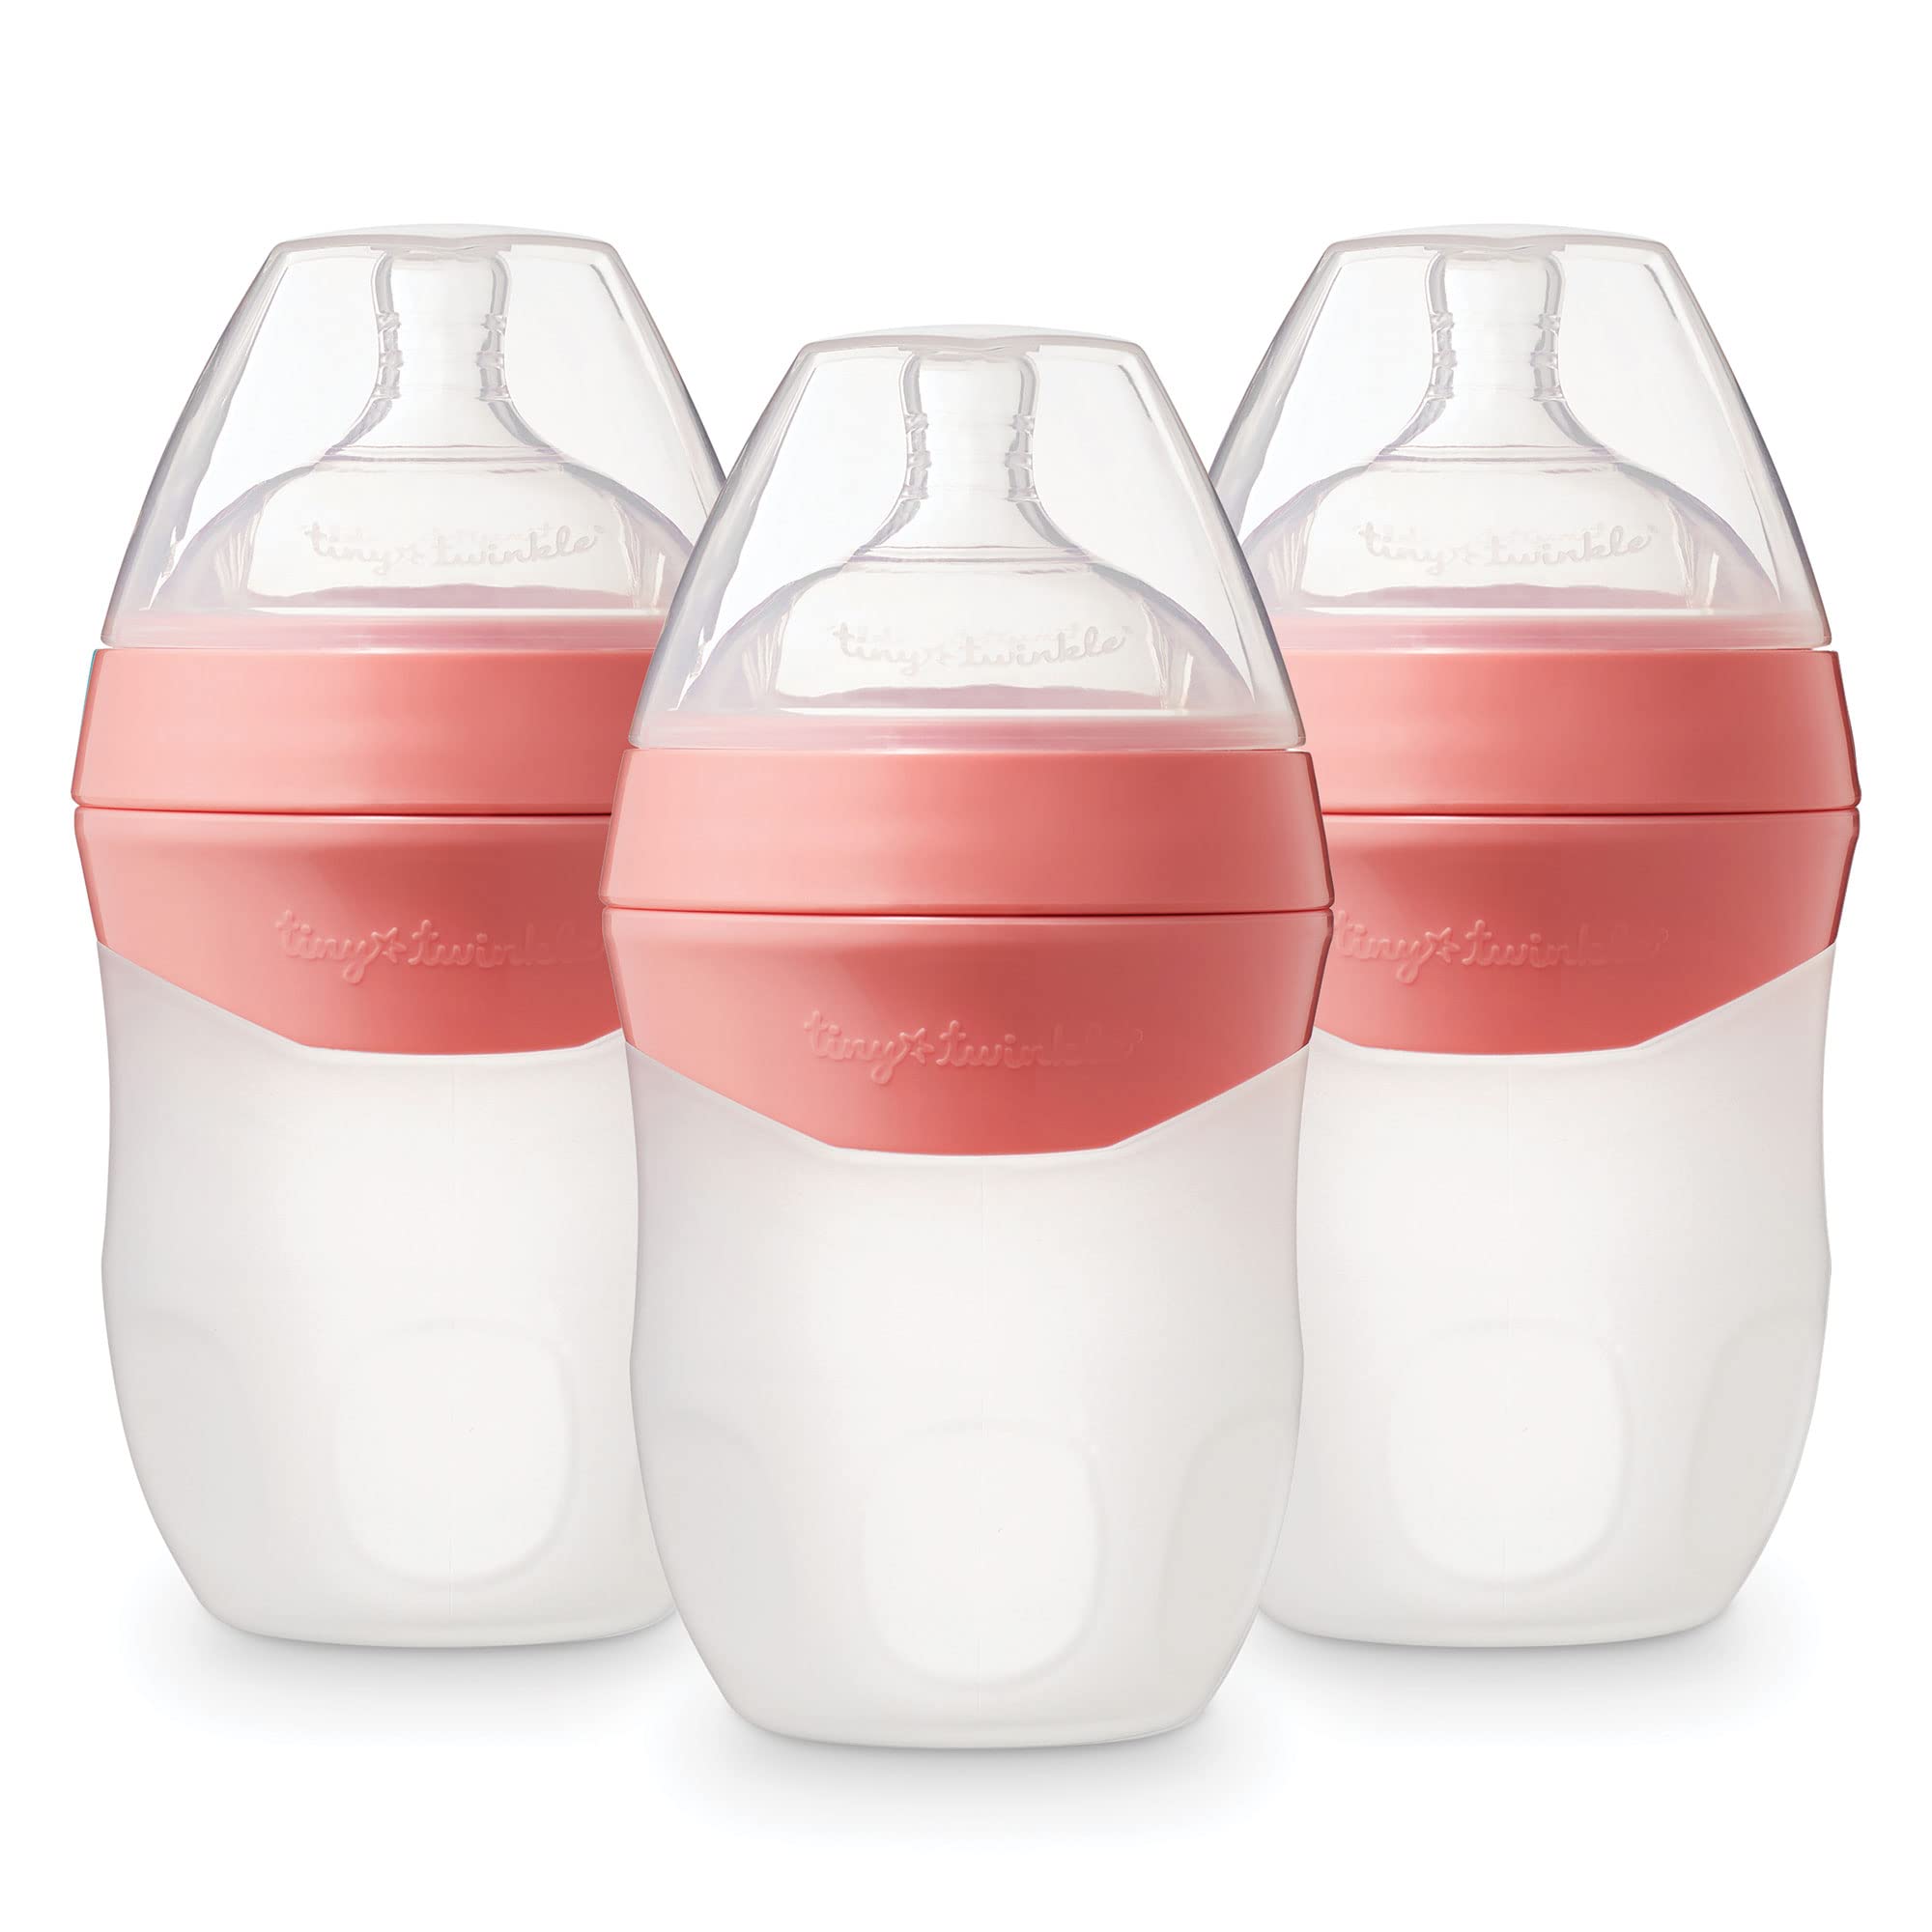 LIttle Toes Easy Grip Milk Bottle/Sippy Cup 2-in-1 – Baby and